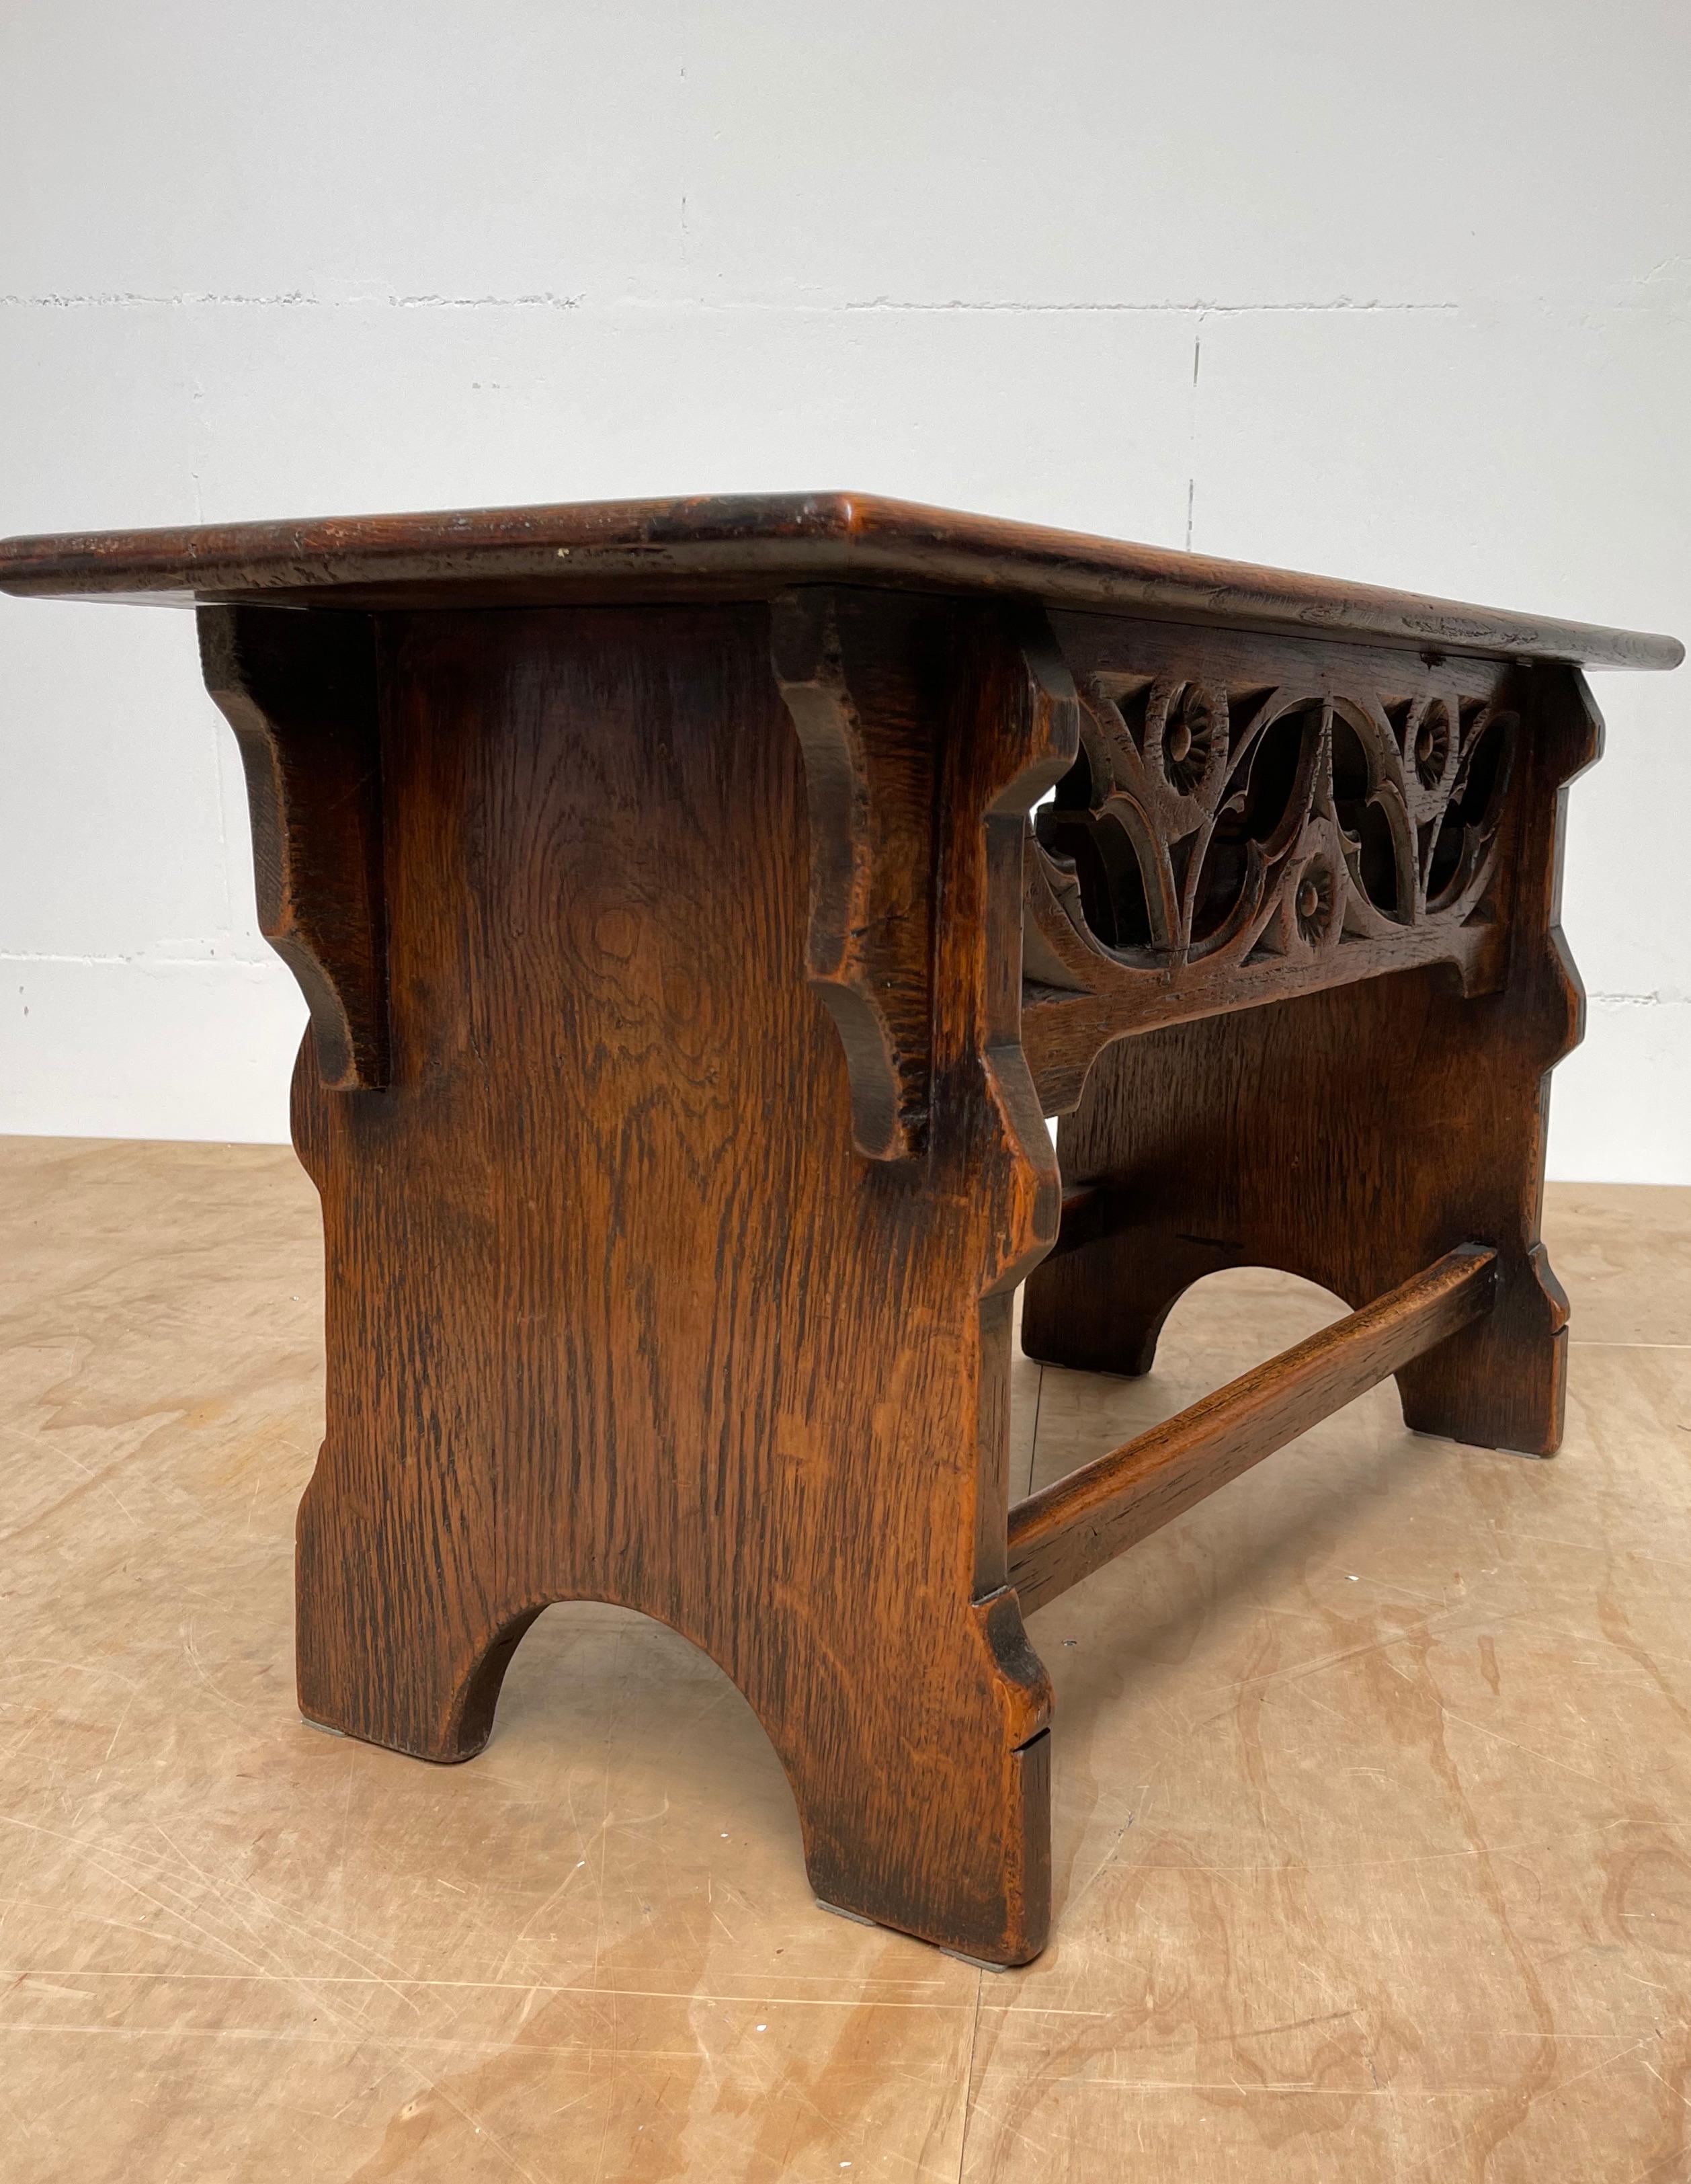 19th Century Antique Early 1900s Gothic Revival Stool or Table with Hand Carved Elements For Sale